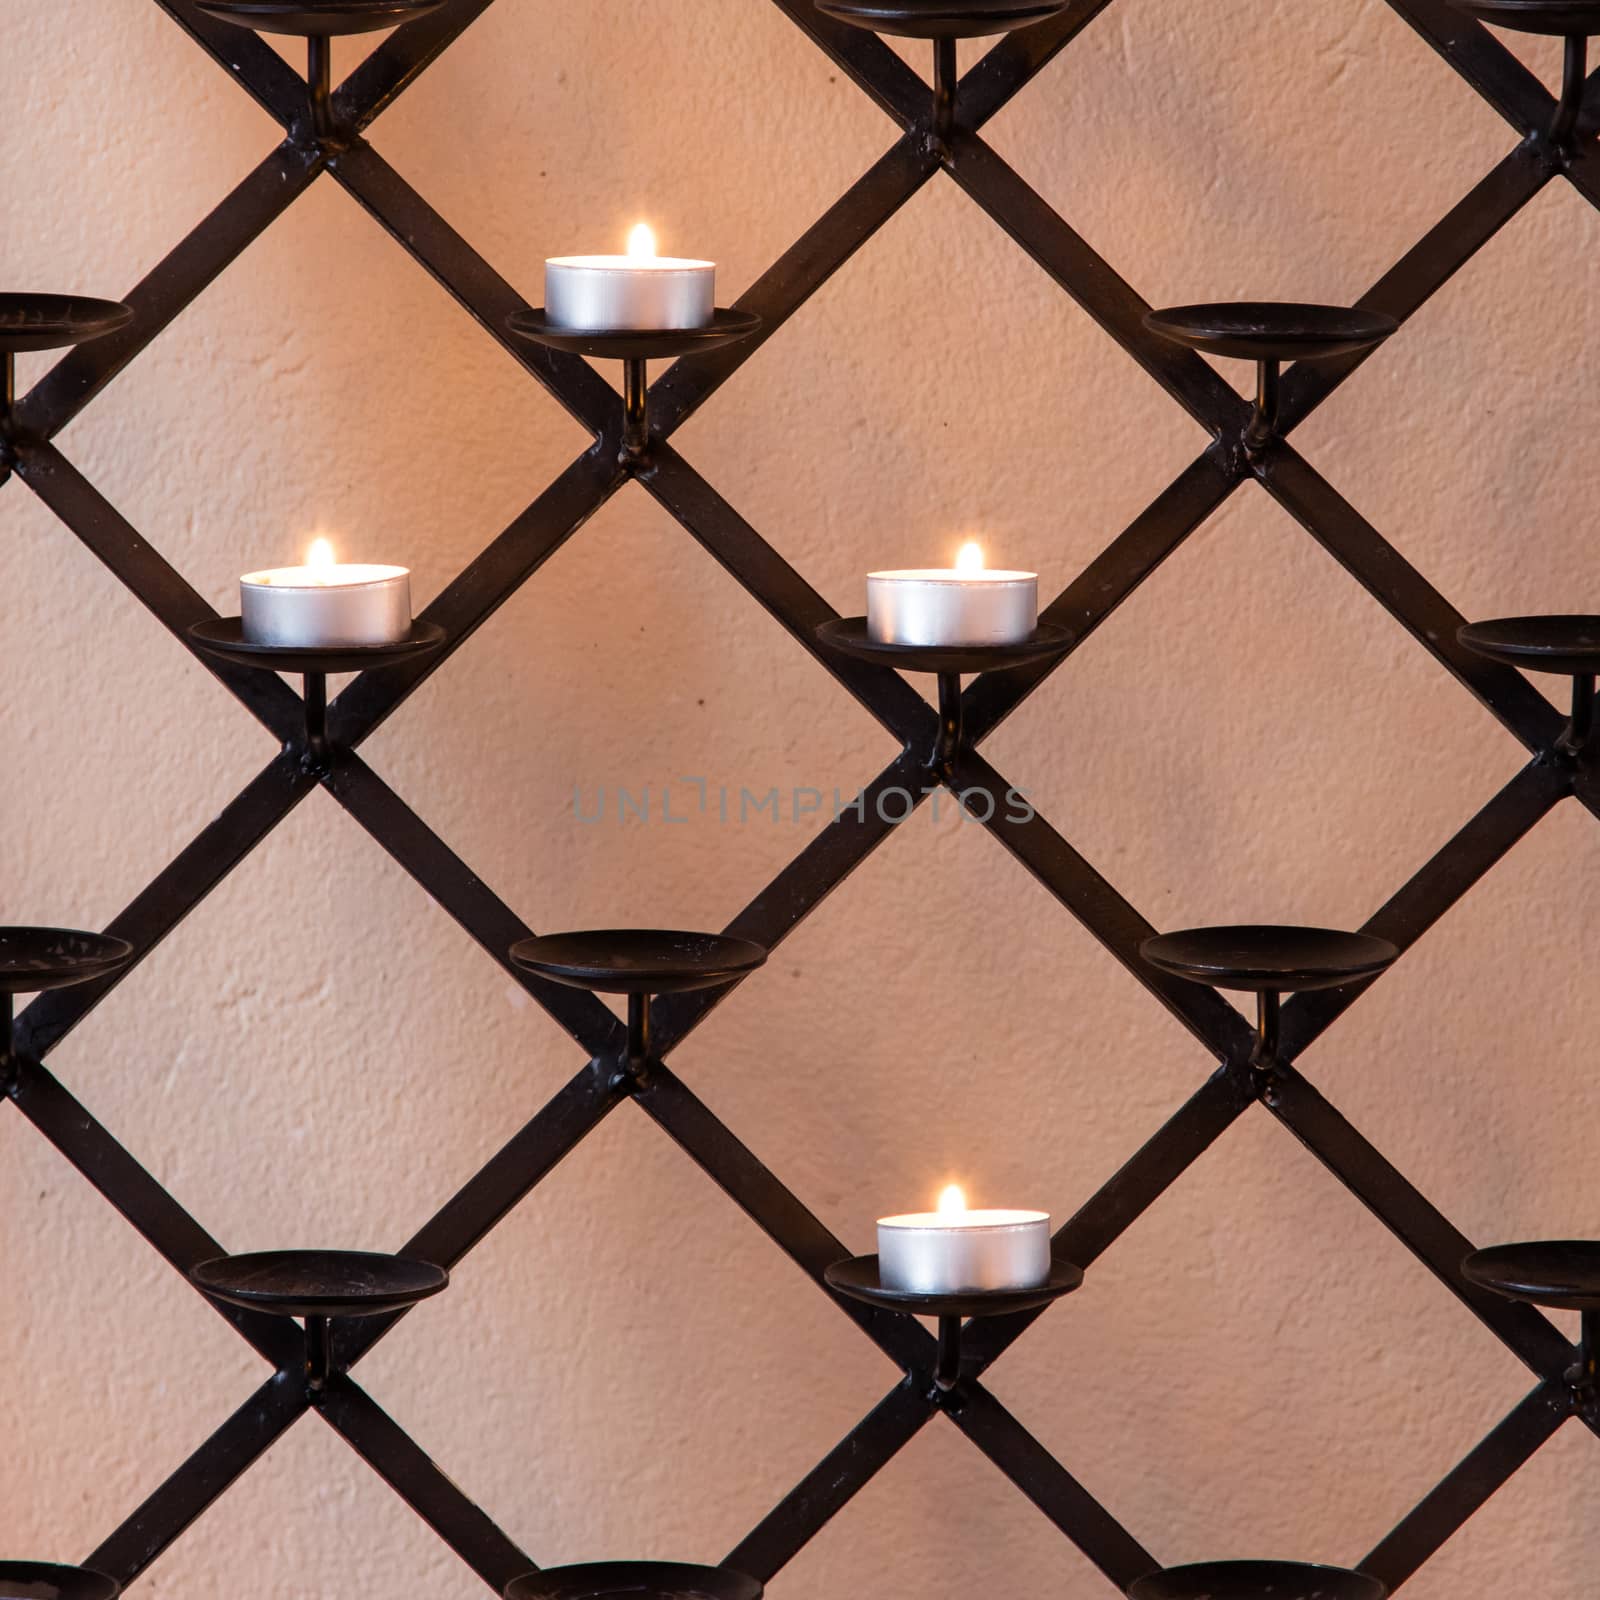 Candles in a church by michaklootwijk